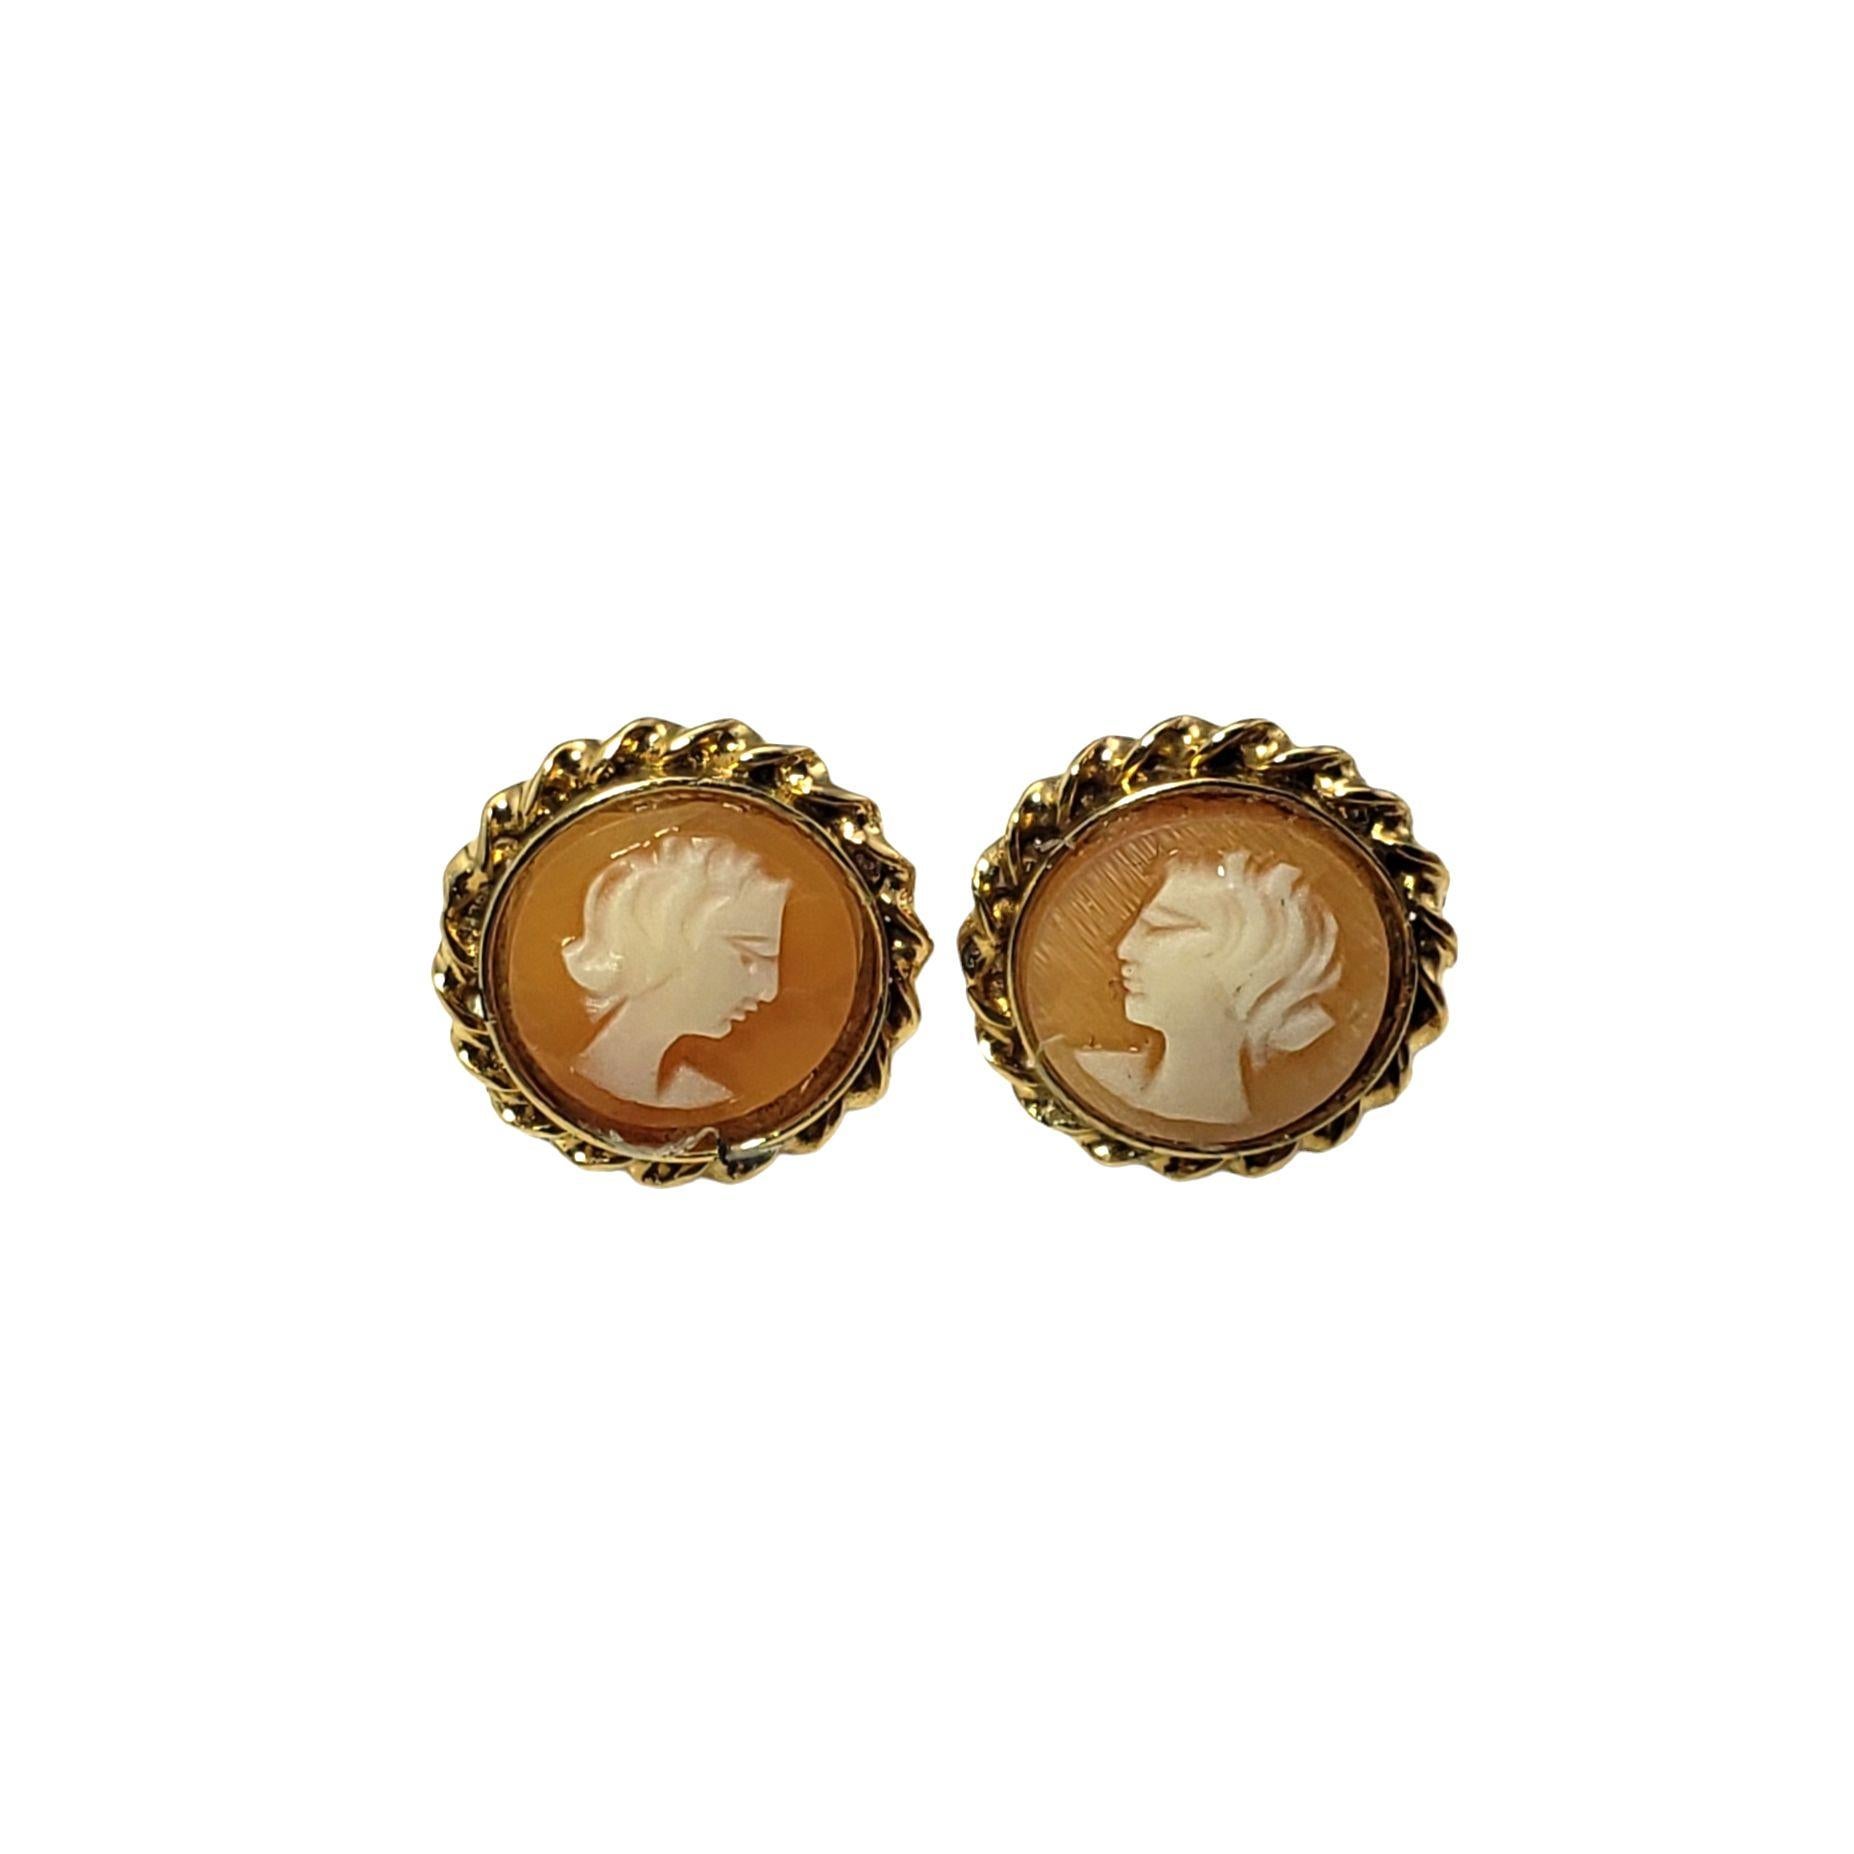 These elegant cameo earrings each feature a lovely lady in profile framed in 14K yellow gold.  Push back closures.

Size: 11 mm

Weight:  1.2 dwt. /  1.9 gr.

Tested 14K gold.

Very good condition, professionally polished.

Will come packaged in a